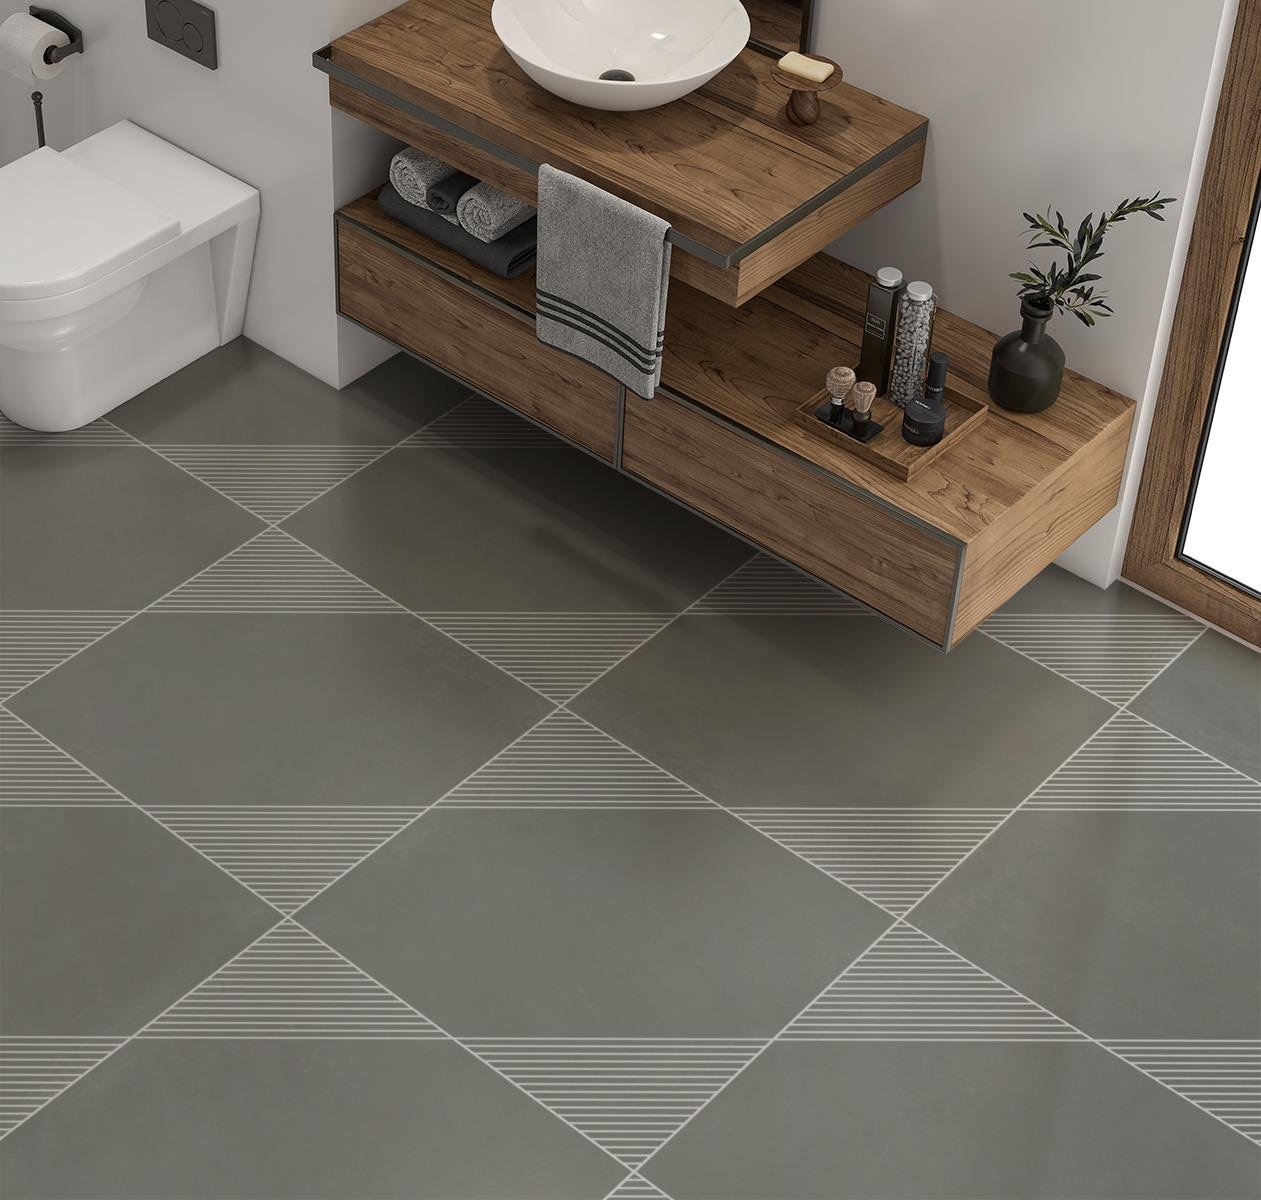 Edgy 1, Pattern A, Grande Scale, Concrete, Warm Gray Grout